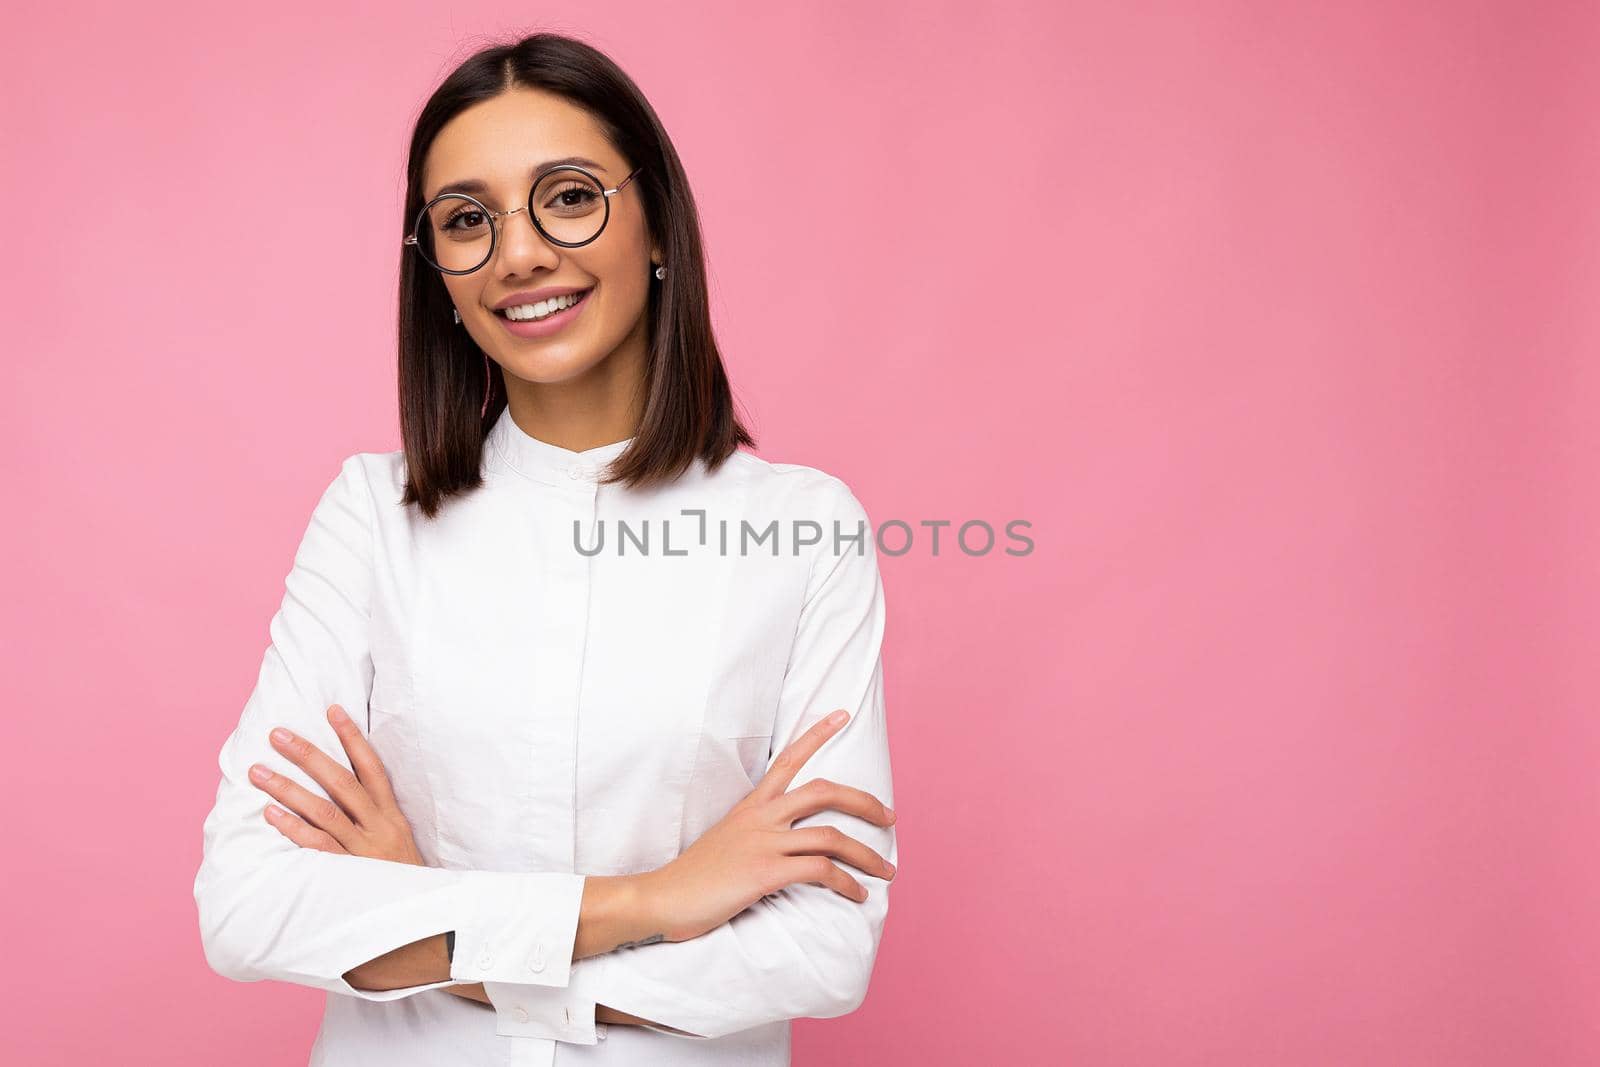 Photo shot of beautiful smiling young brunette woman wearing casual clothes and stylish optical glasses isolated over colorful background looking at camera. copy space